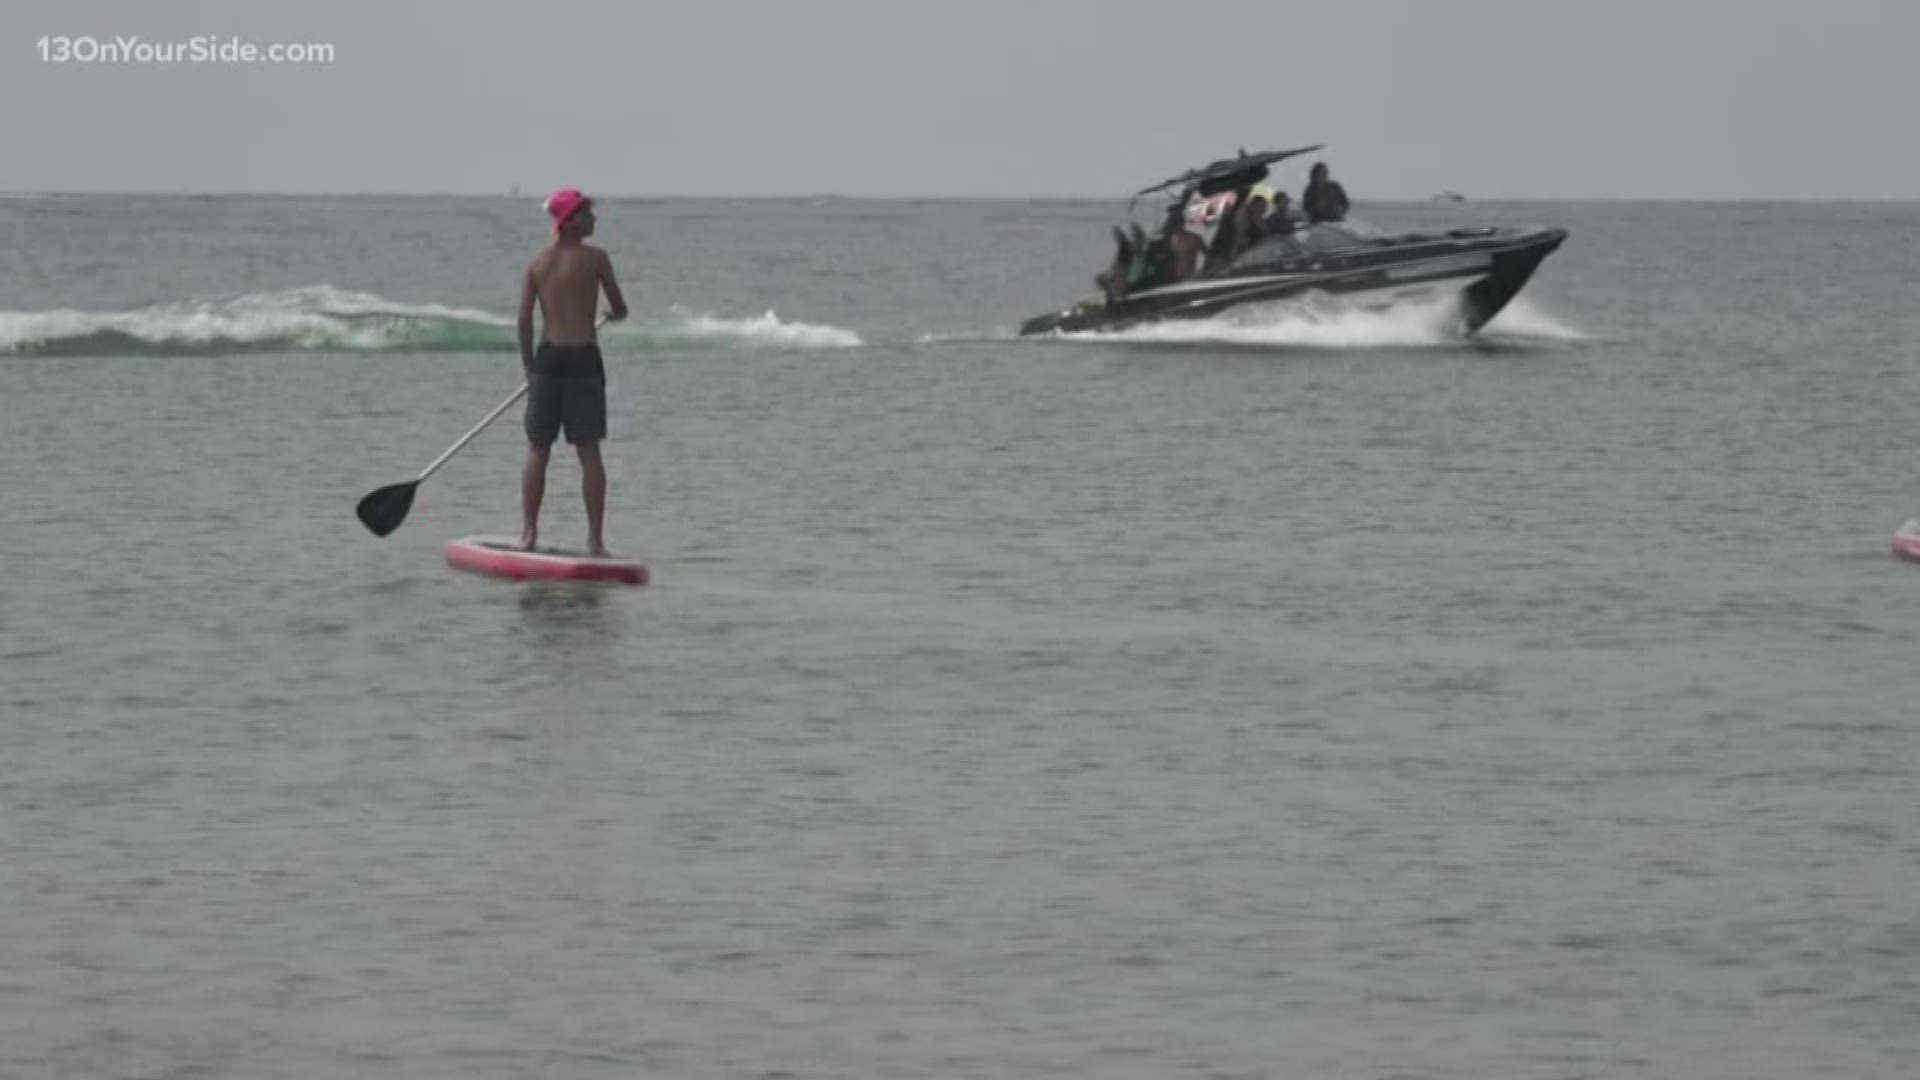 We preview the Great Lakes Surf Festival at Pere Marquette Beach happening Saturday from 11am - 7pm.